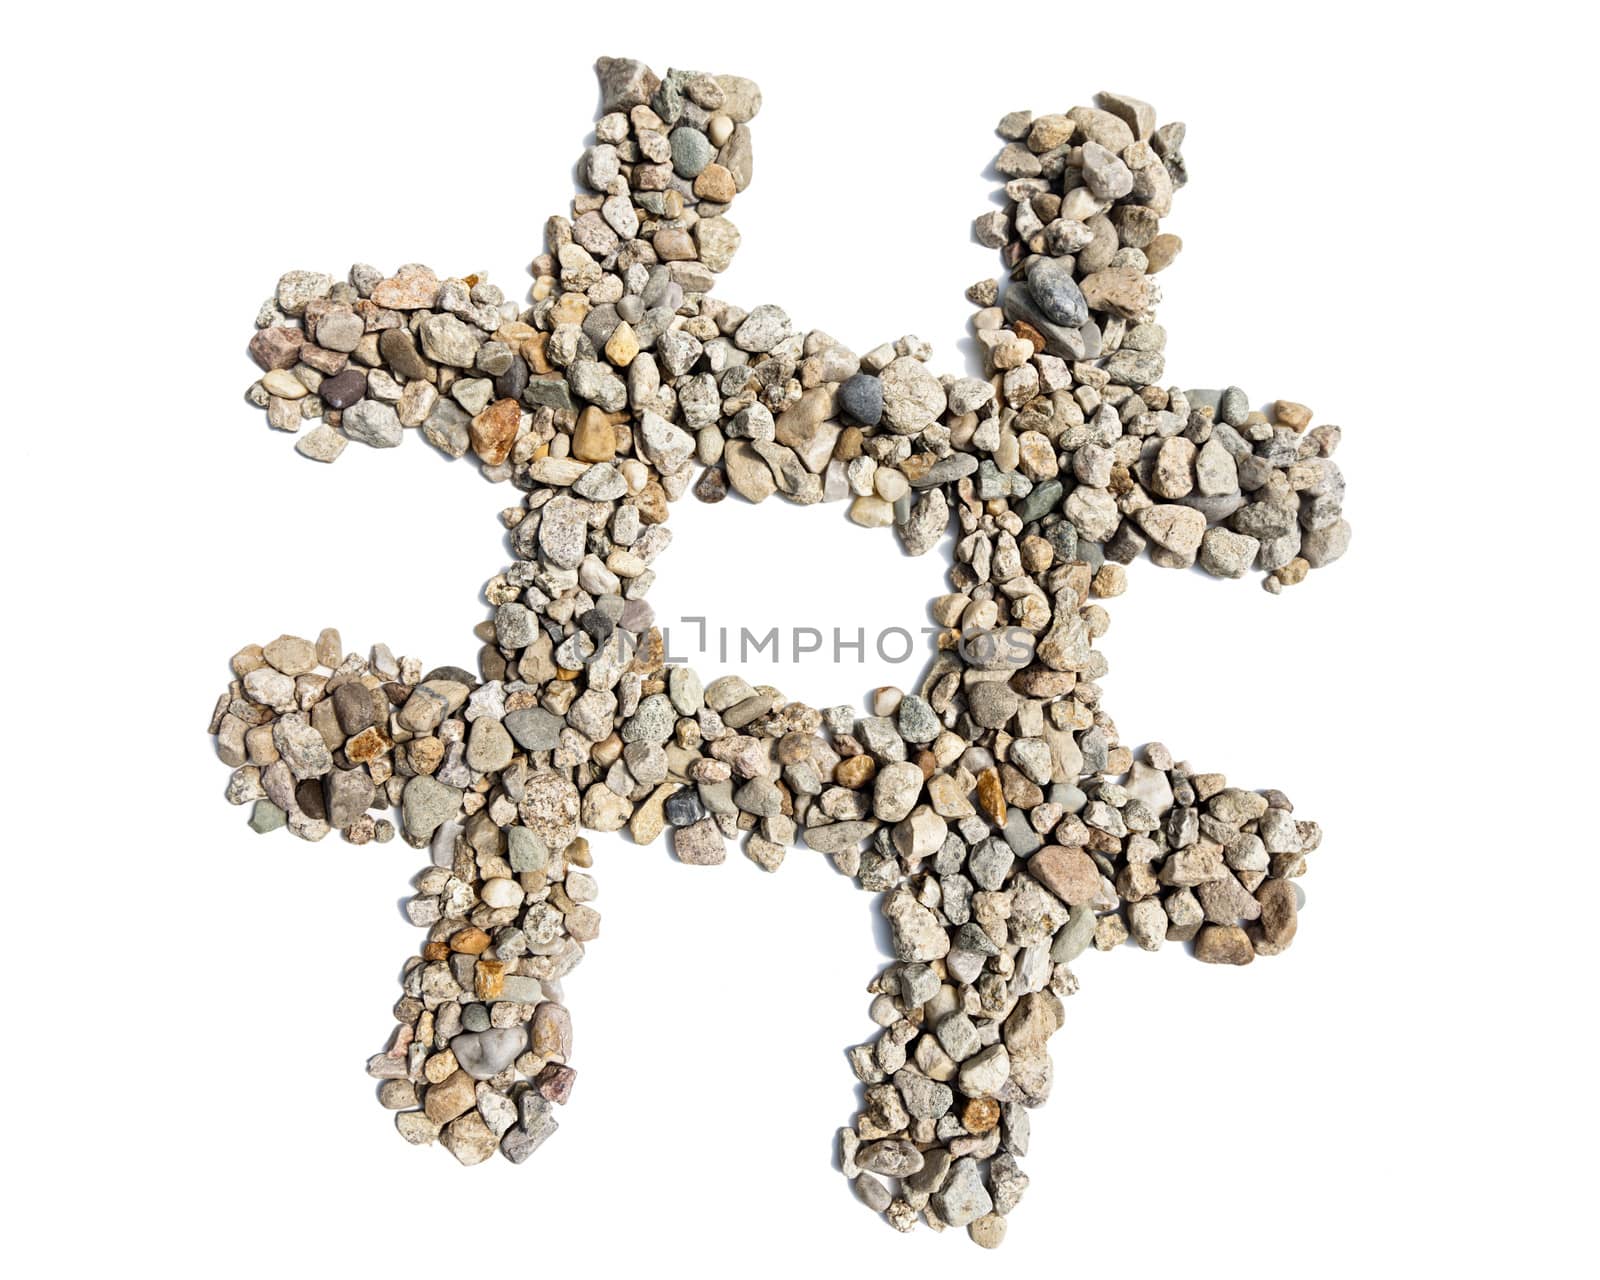 A hashtag made of stones and pebbles against a white background.